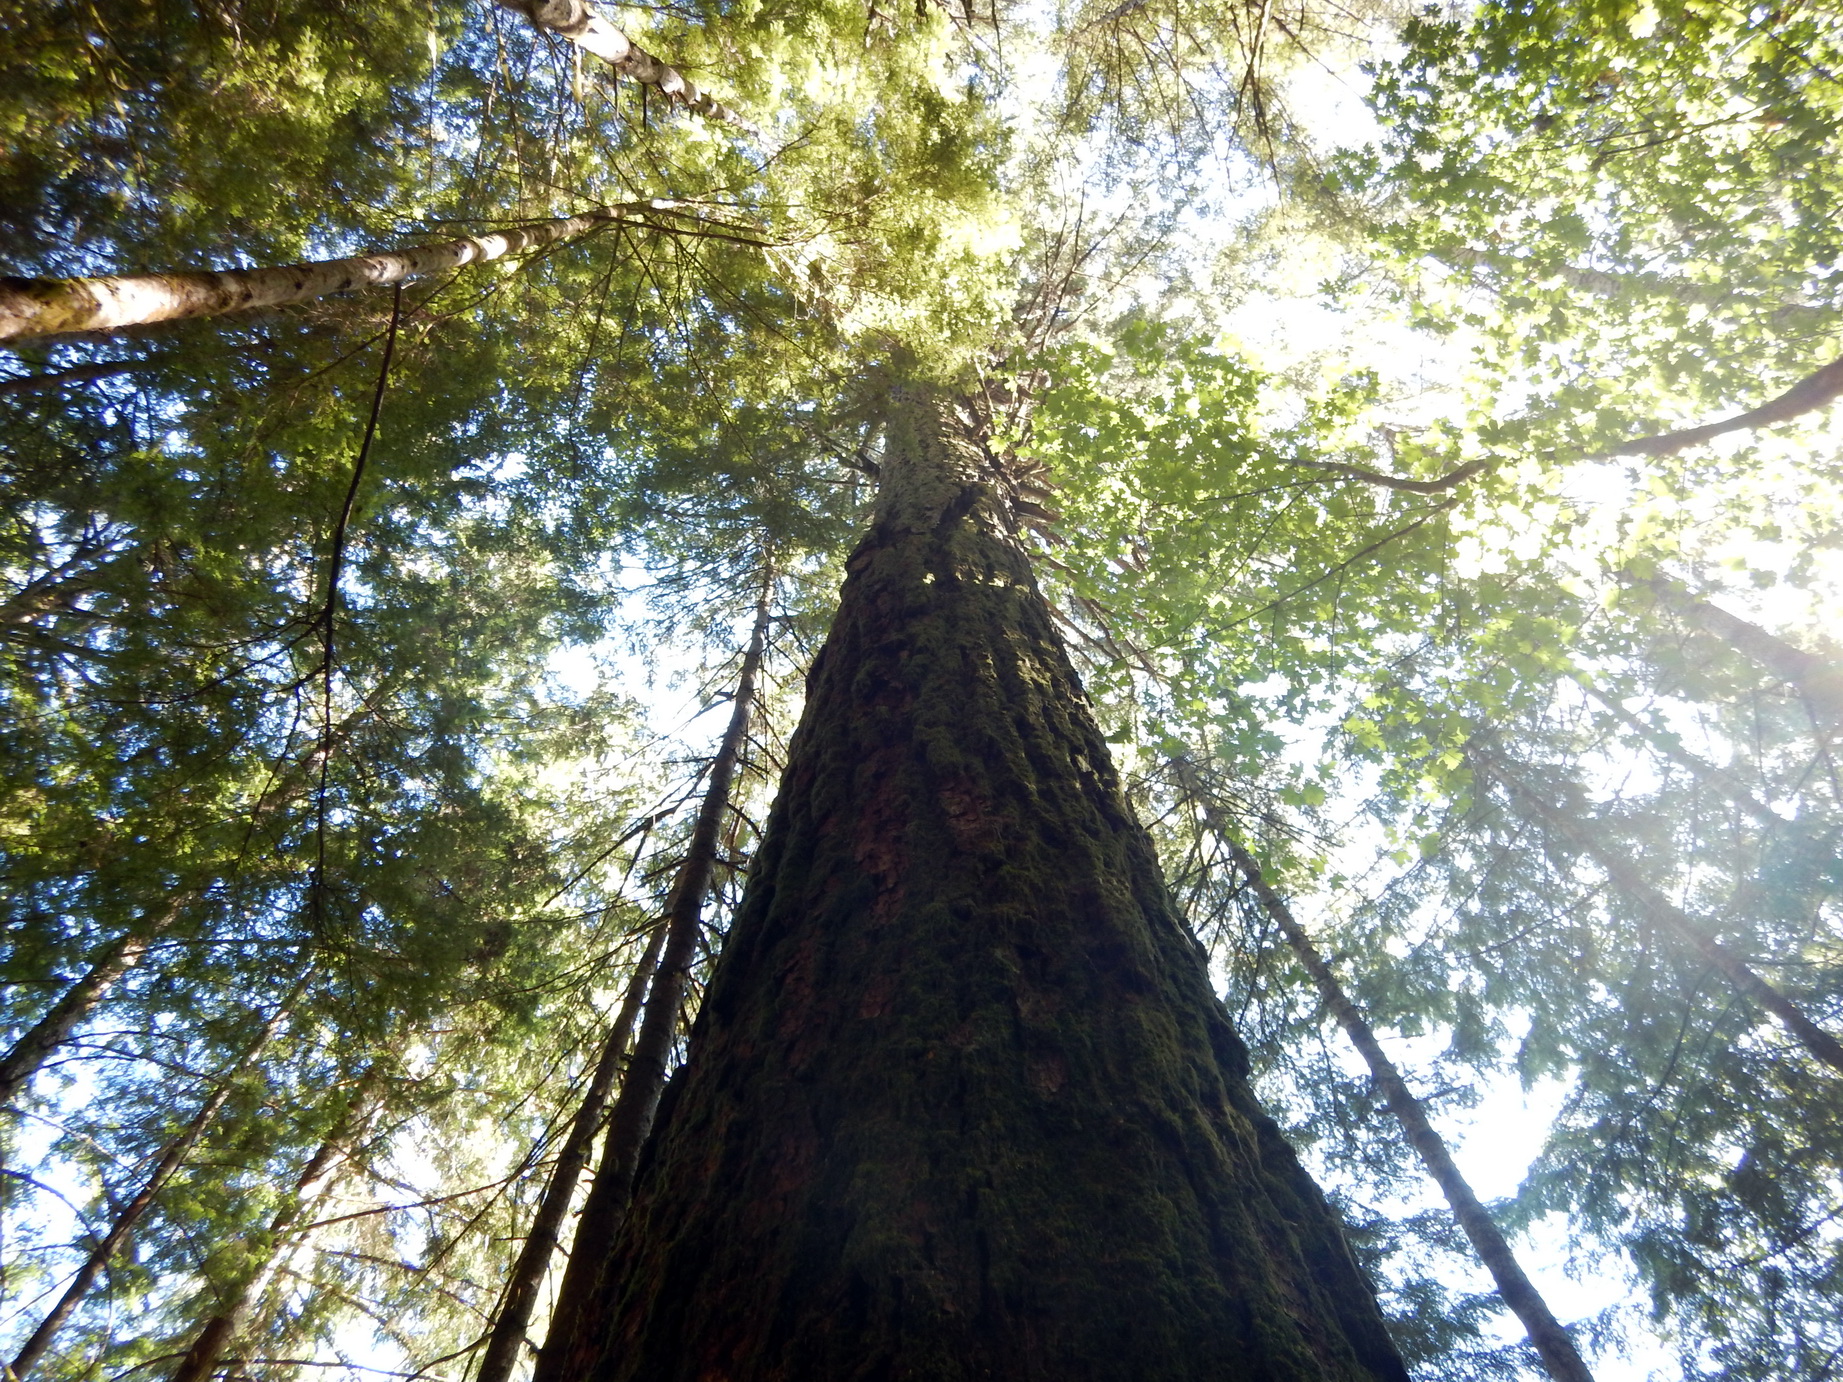 View up close of a large old growth Douglas Fir tree